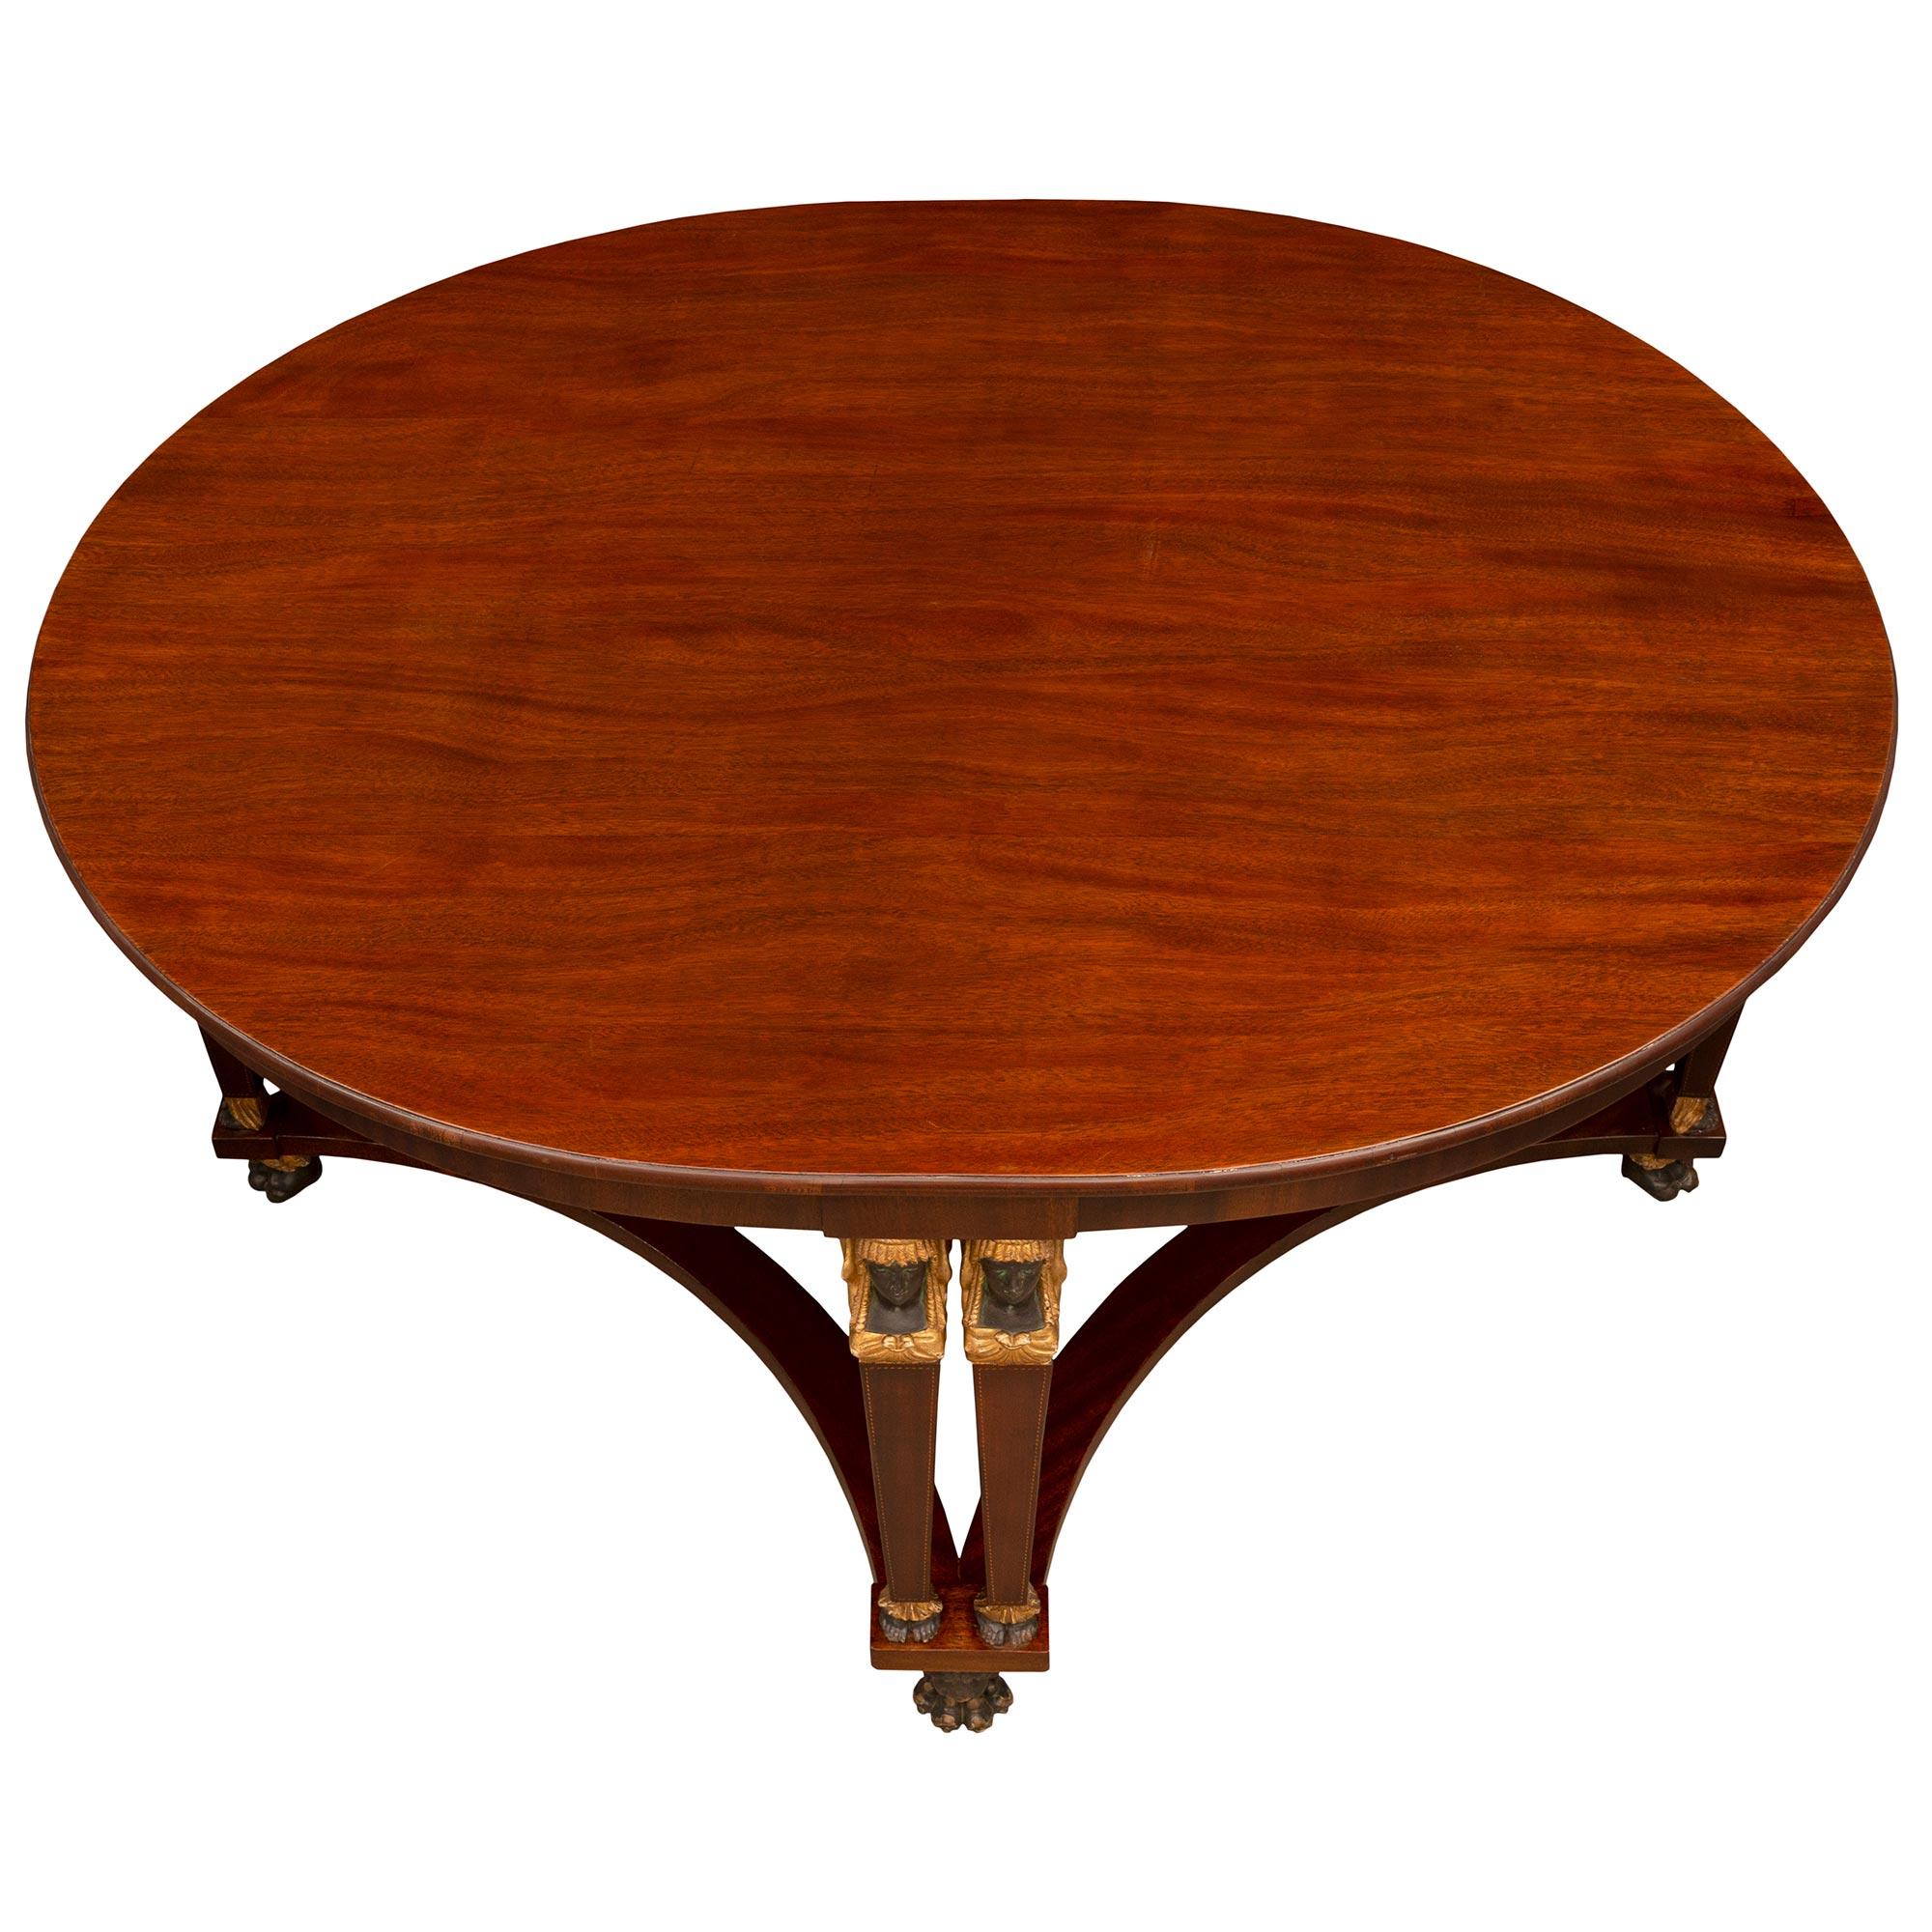 An impressive and most handsome Italian 19th century Neo-Classical st. Mahogany, polychrome, and giltwood center table. The oval table is raised by striking and most unique lion head and paw feet below four pairs of rare beautiful double leg